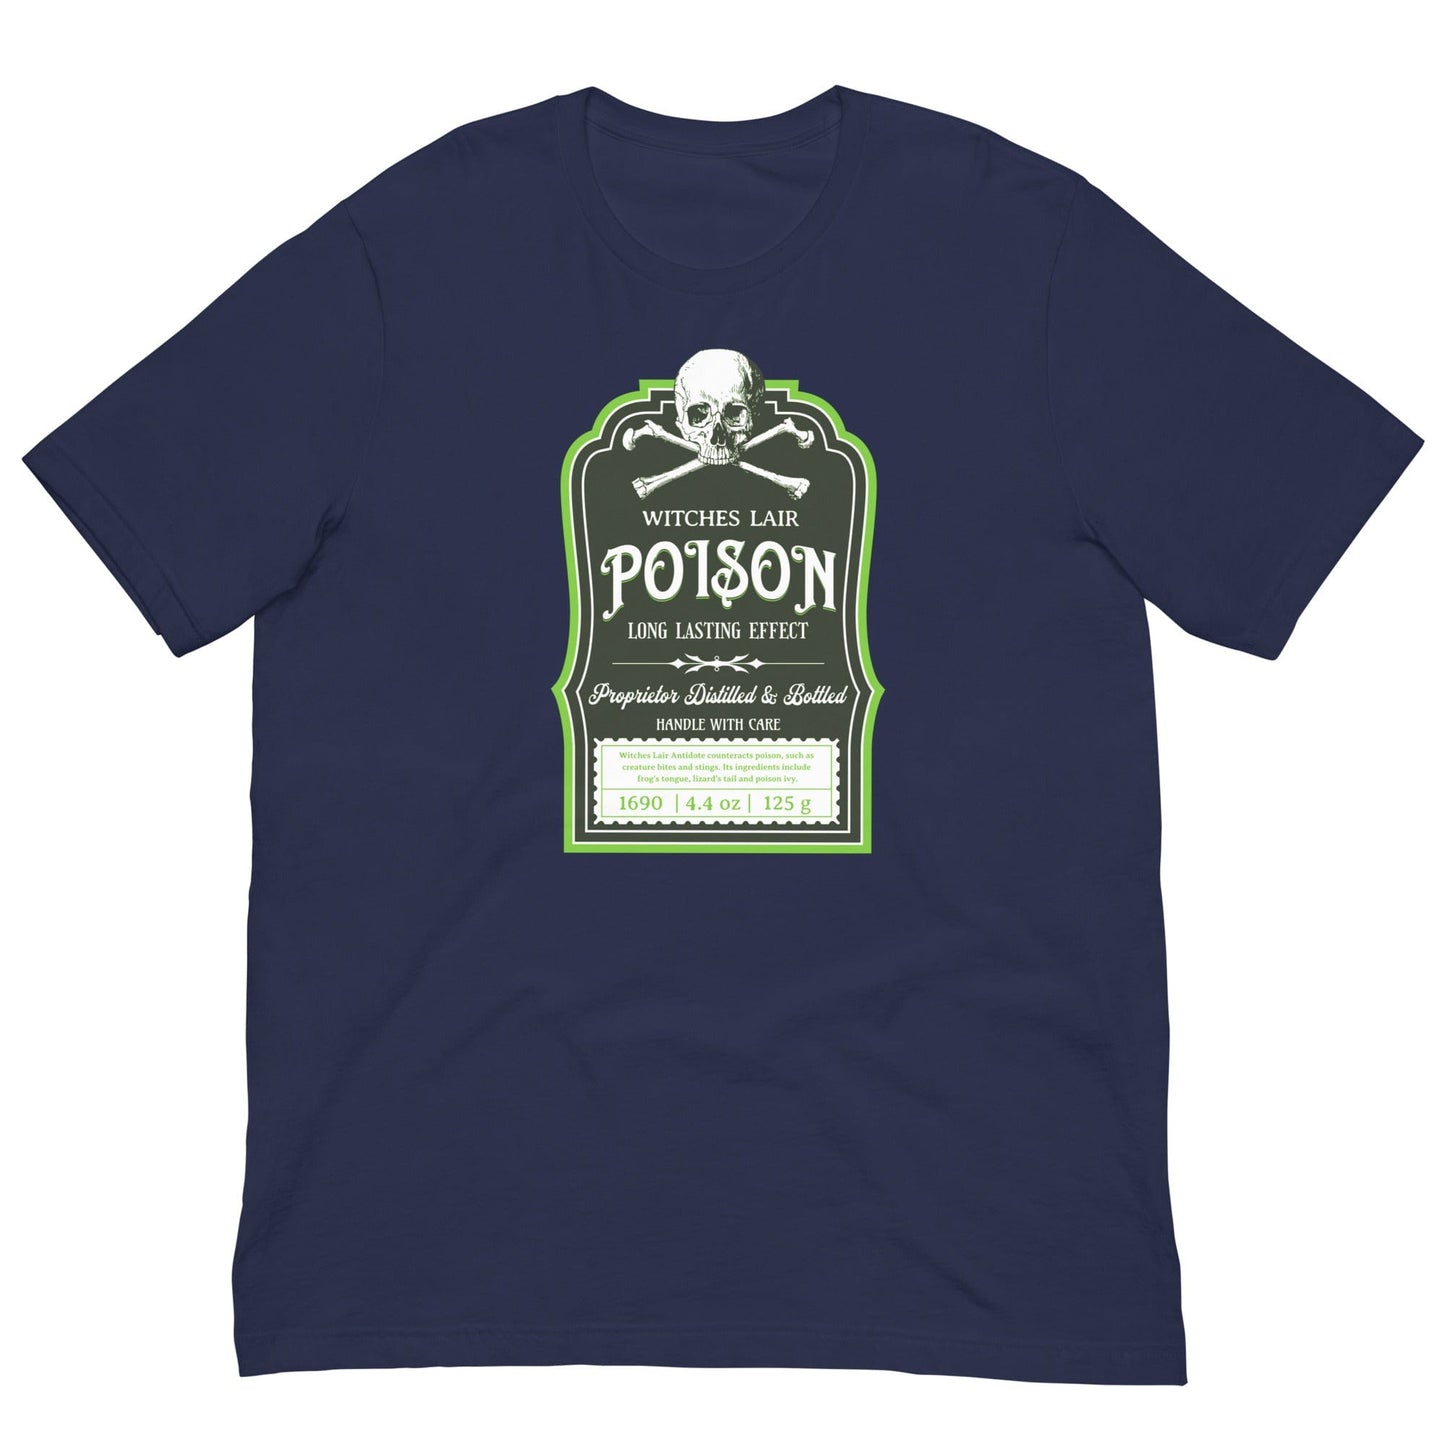 Witches Lair Poison T-shirt Navy / XS